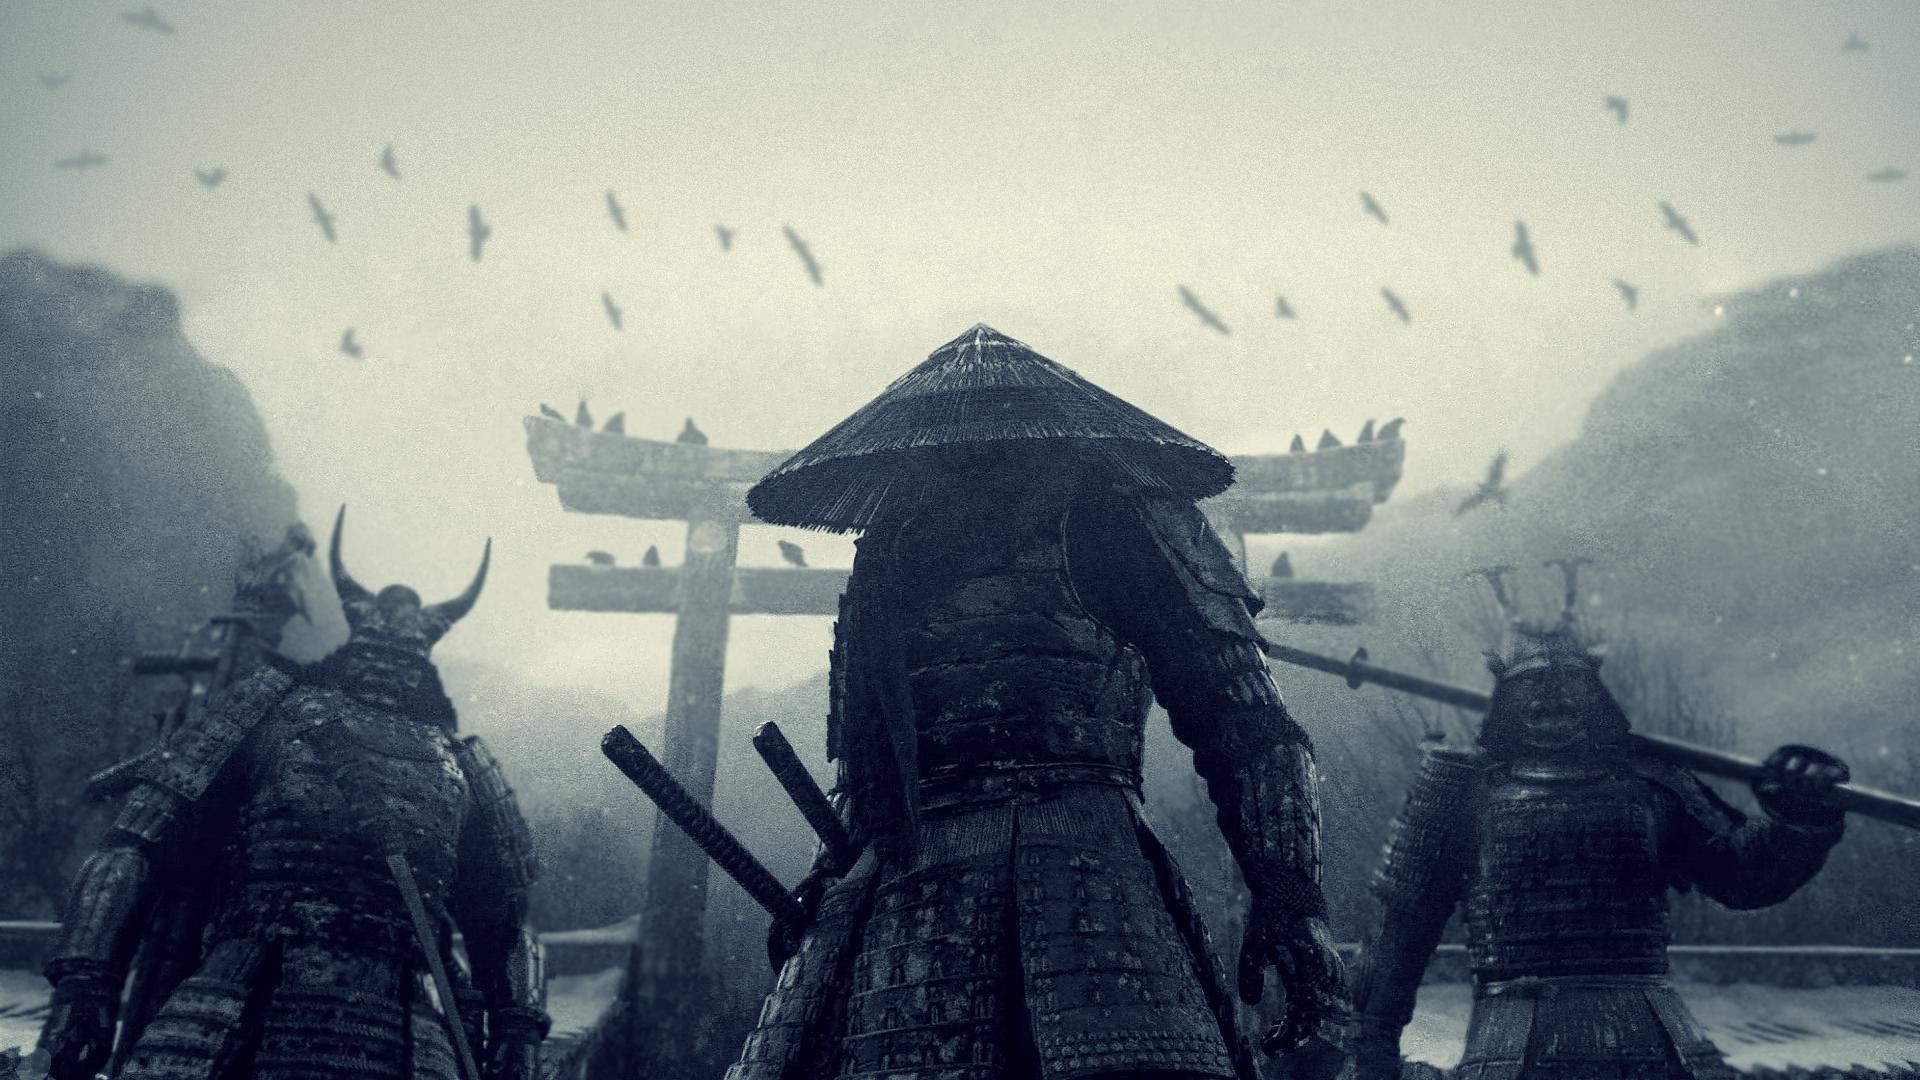 1920x1080 Samurai Battle Picture On Wallpaper Hd 1920 x 1080 px 623.08 KB hd armor  traditional iphone